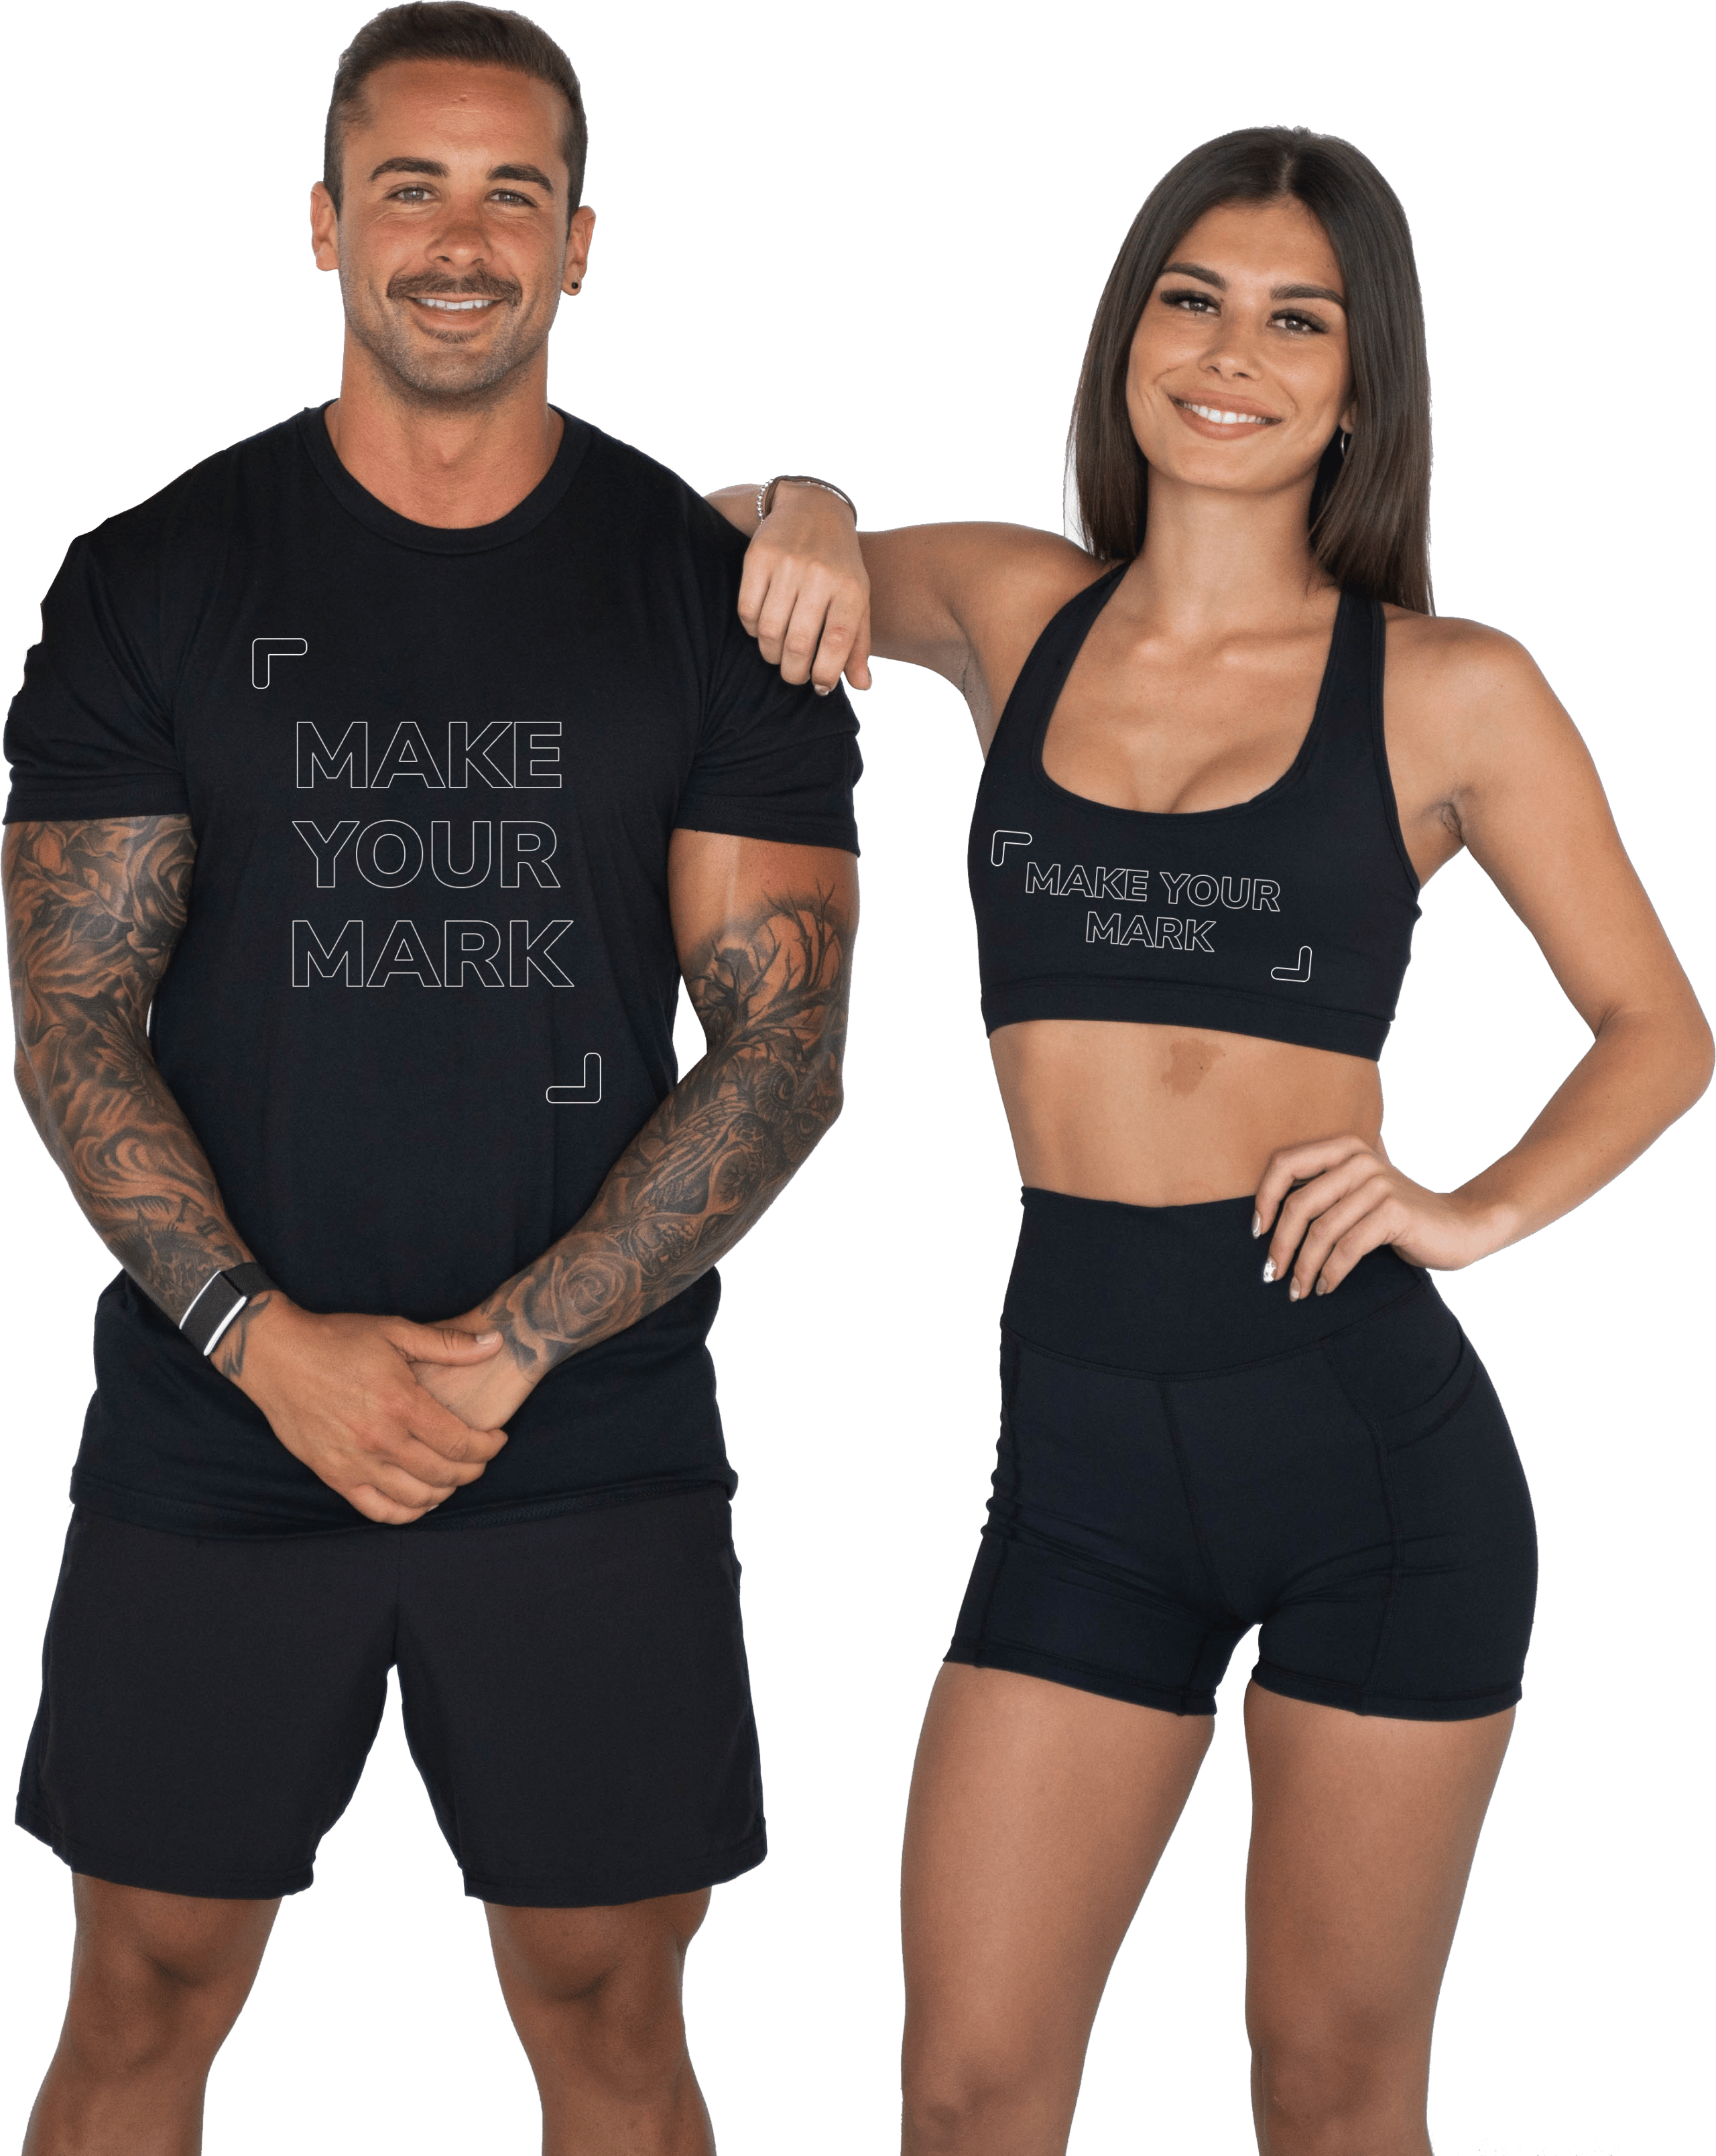 Custom Printed Activewear & Apparel by FITPRINT